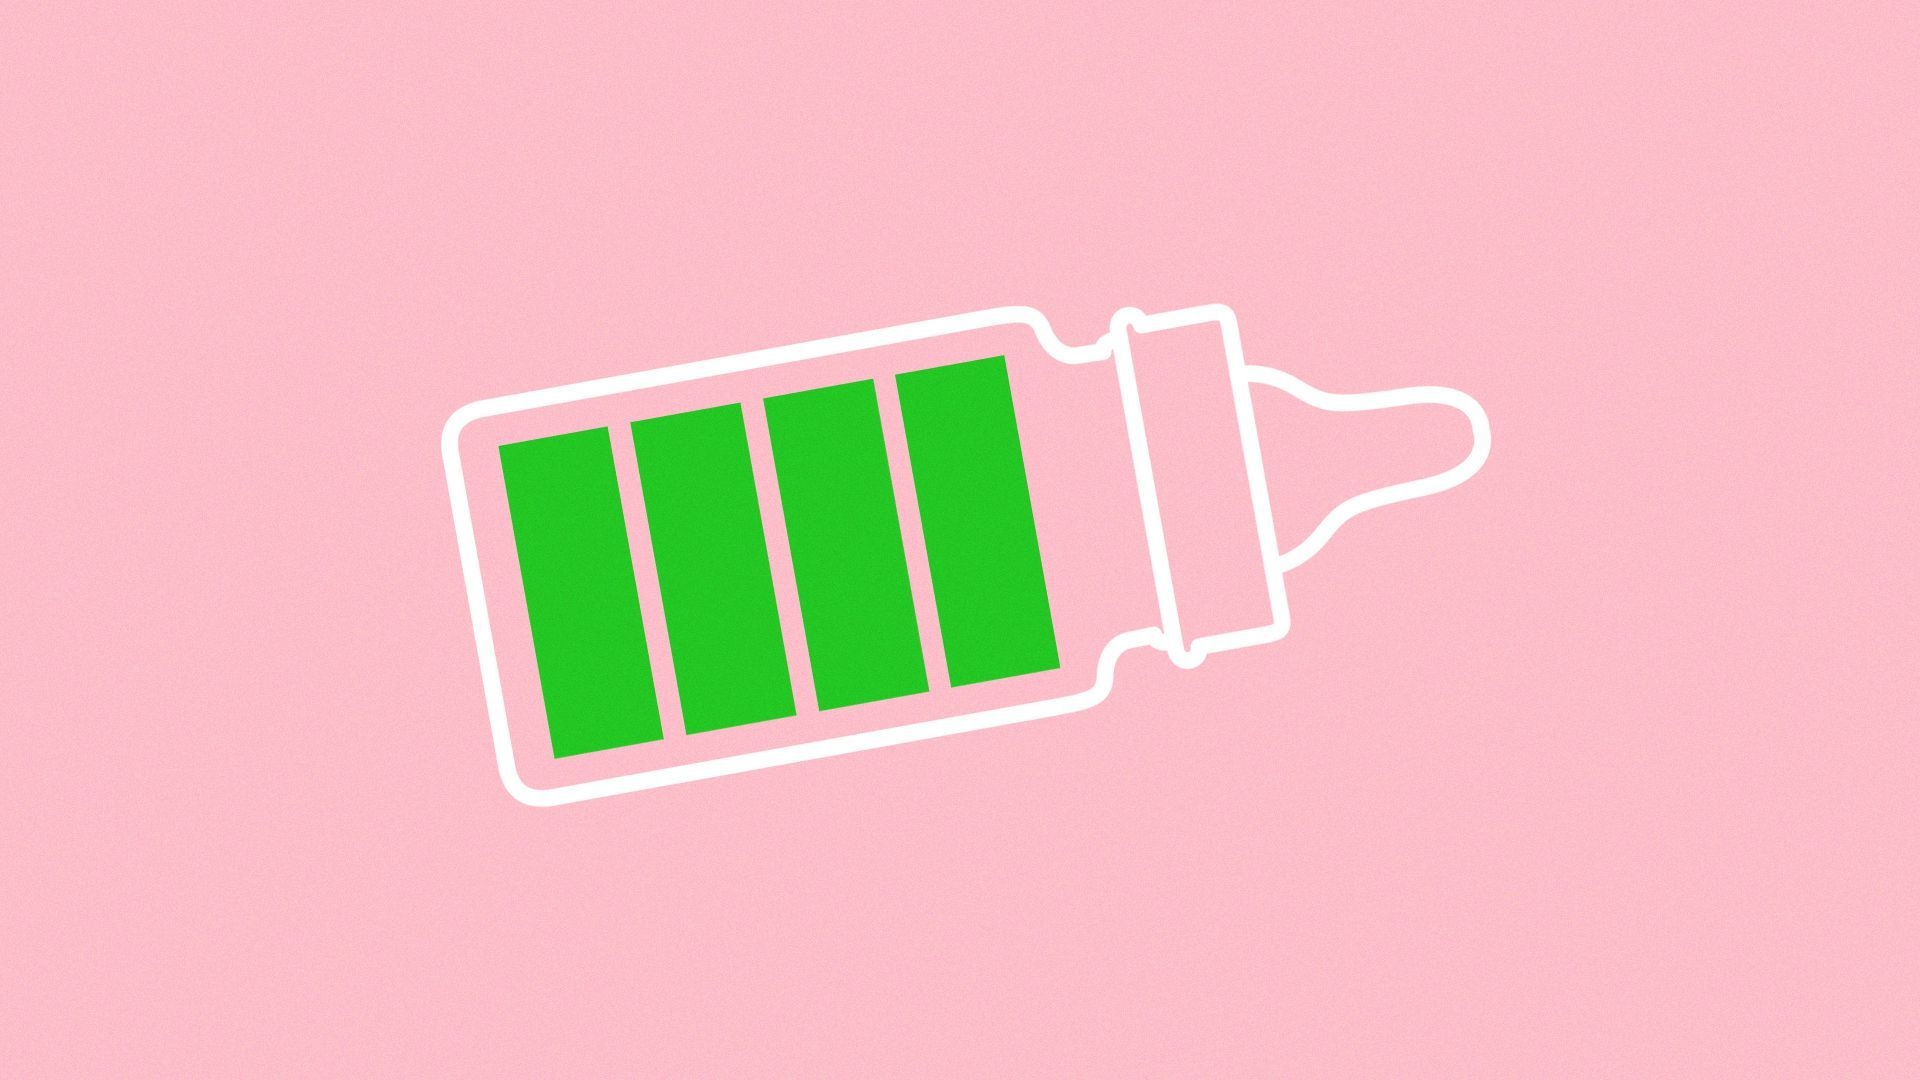 Illustration of a battery icon, but the outline is shaped like a bottle of milk.